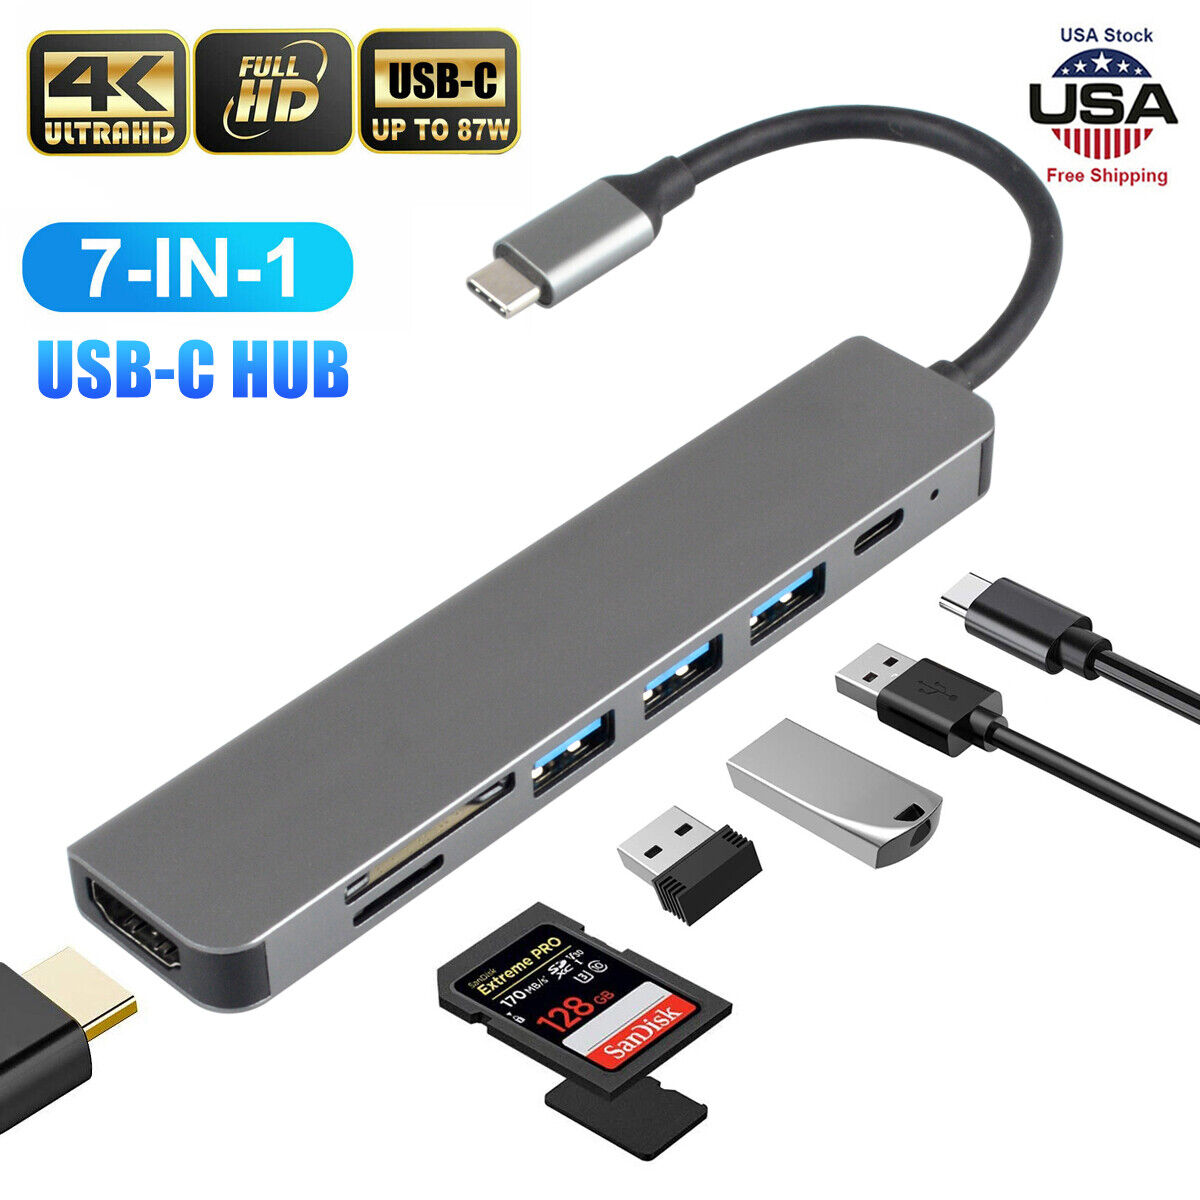 7 in 1 USB-C Multiport Adapter for Macbook Pro/Air